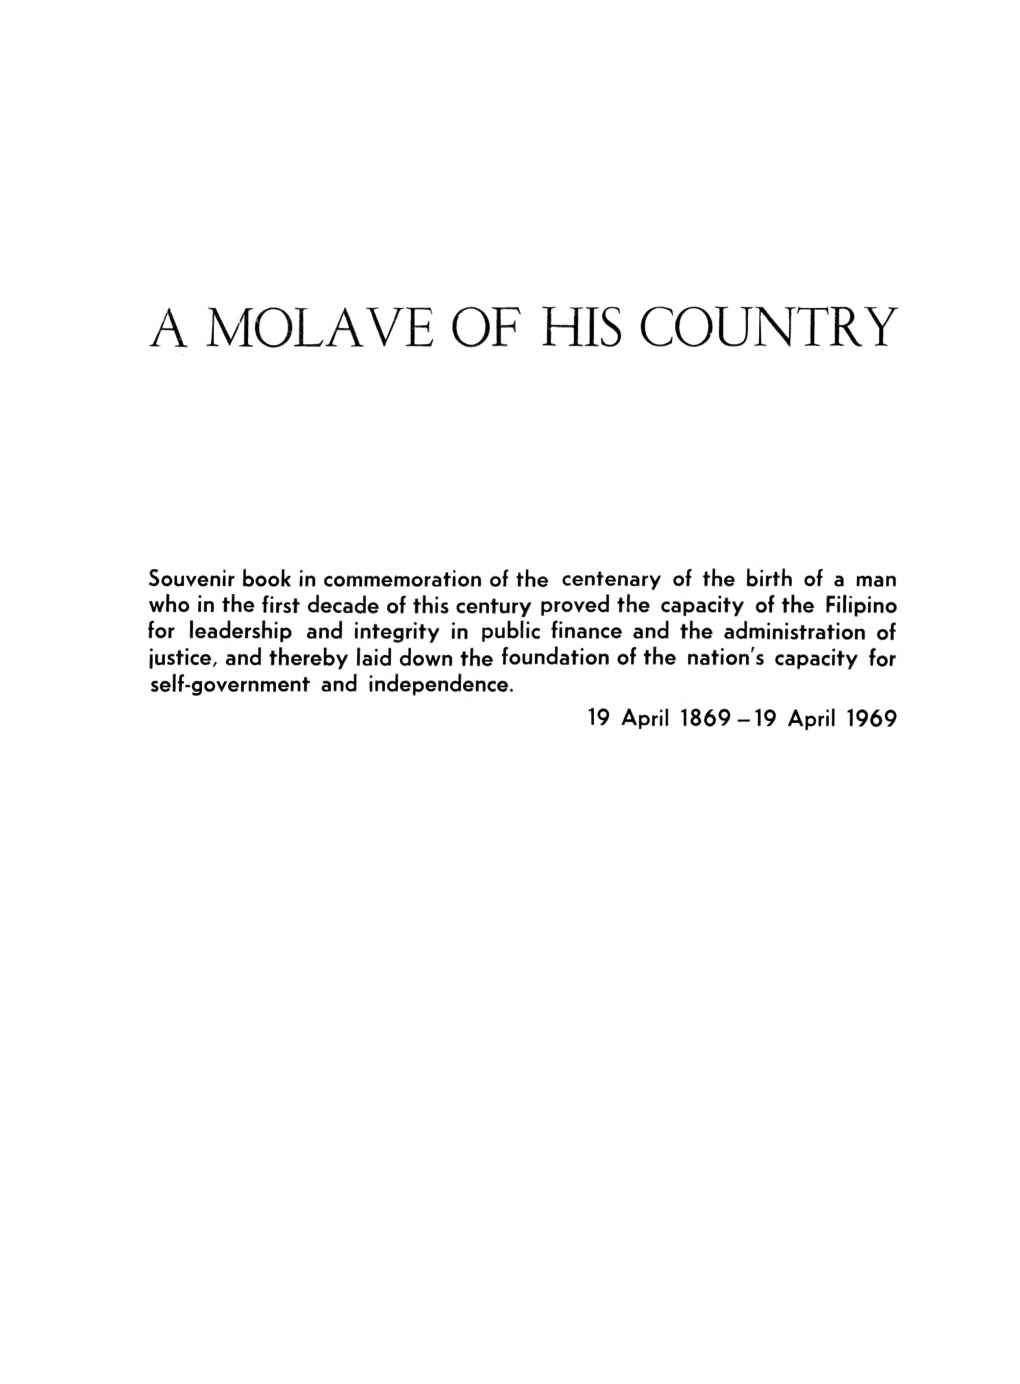 A Mola Ve of His Country